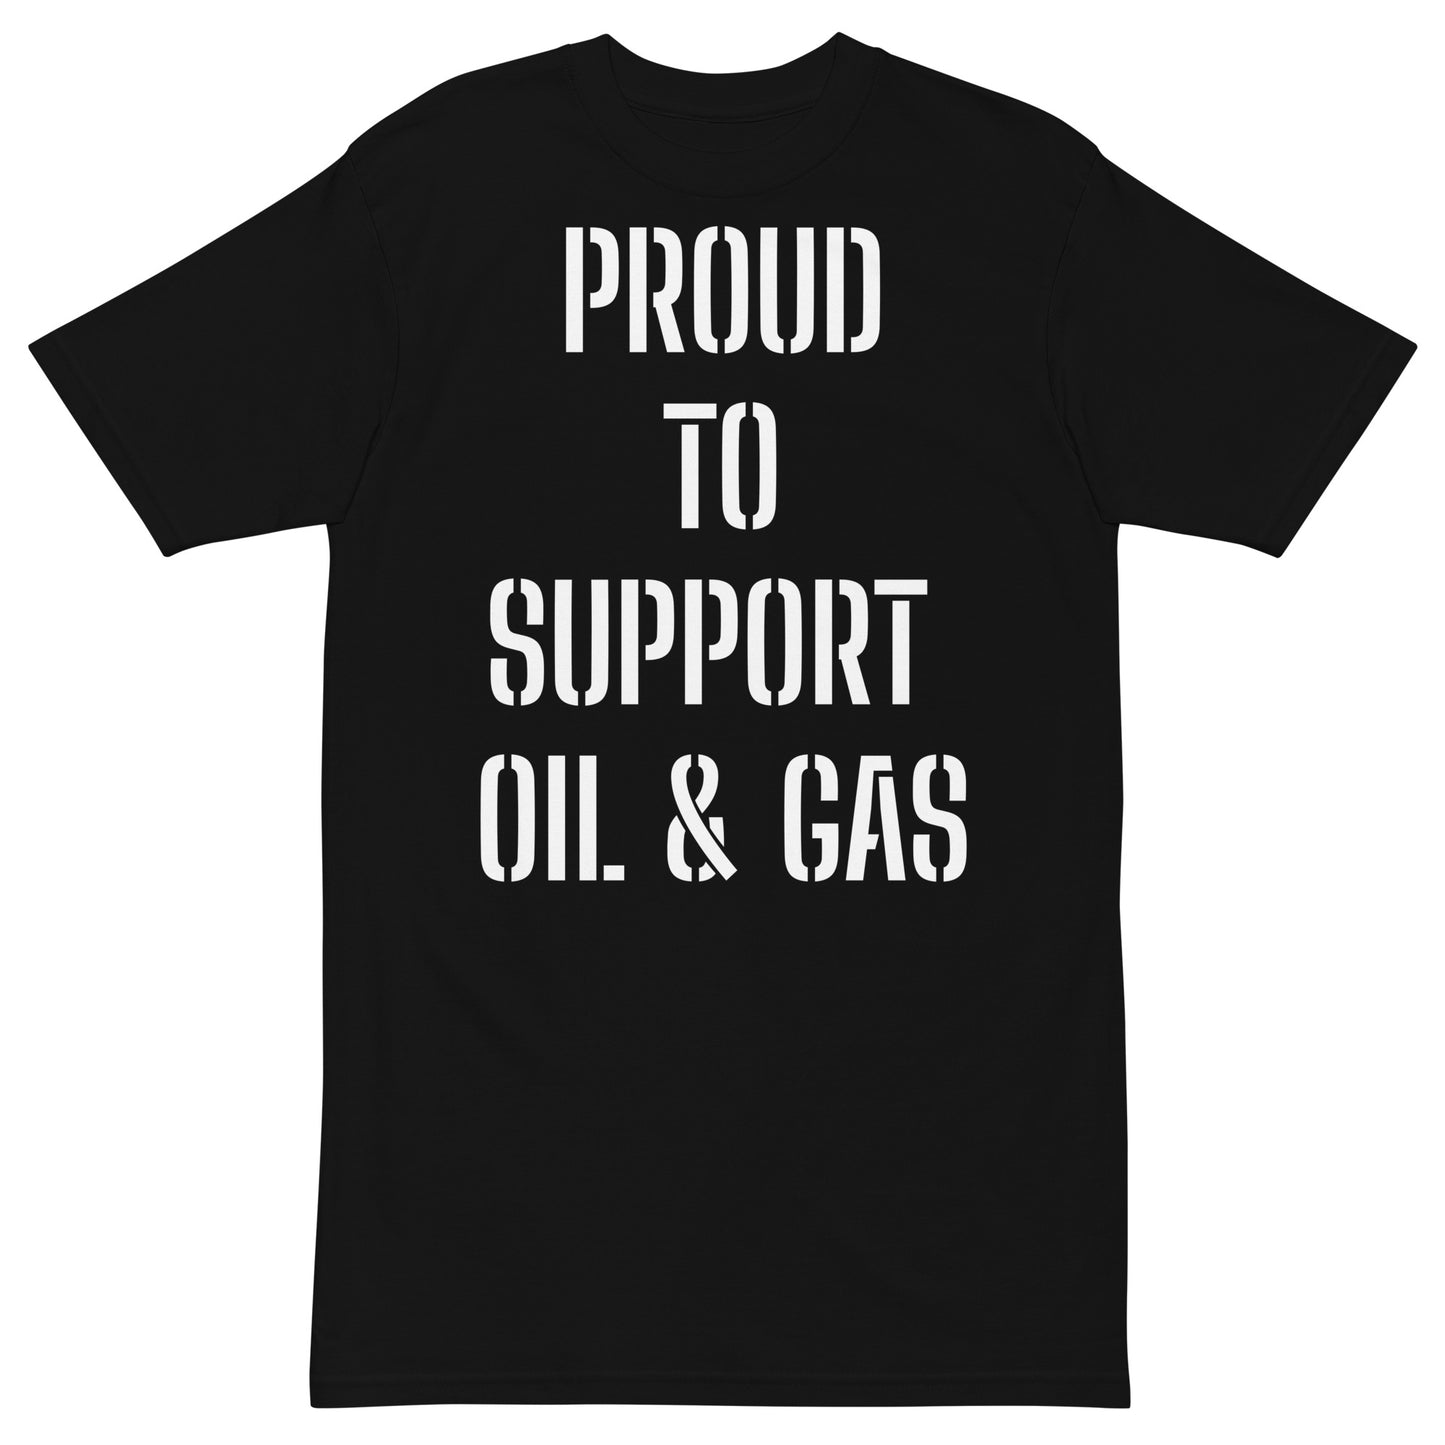 PROUD TO SUPPORT OIL & GAS Men’s premium heavyweight tee